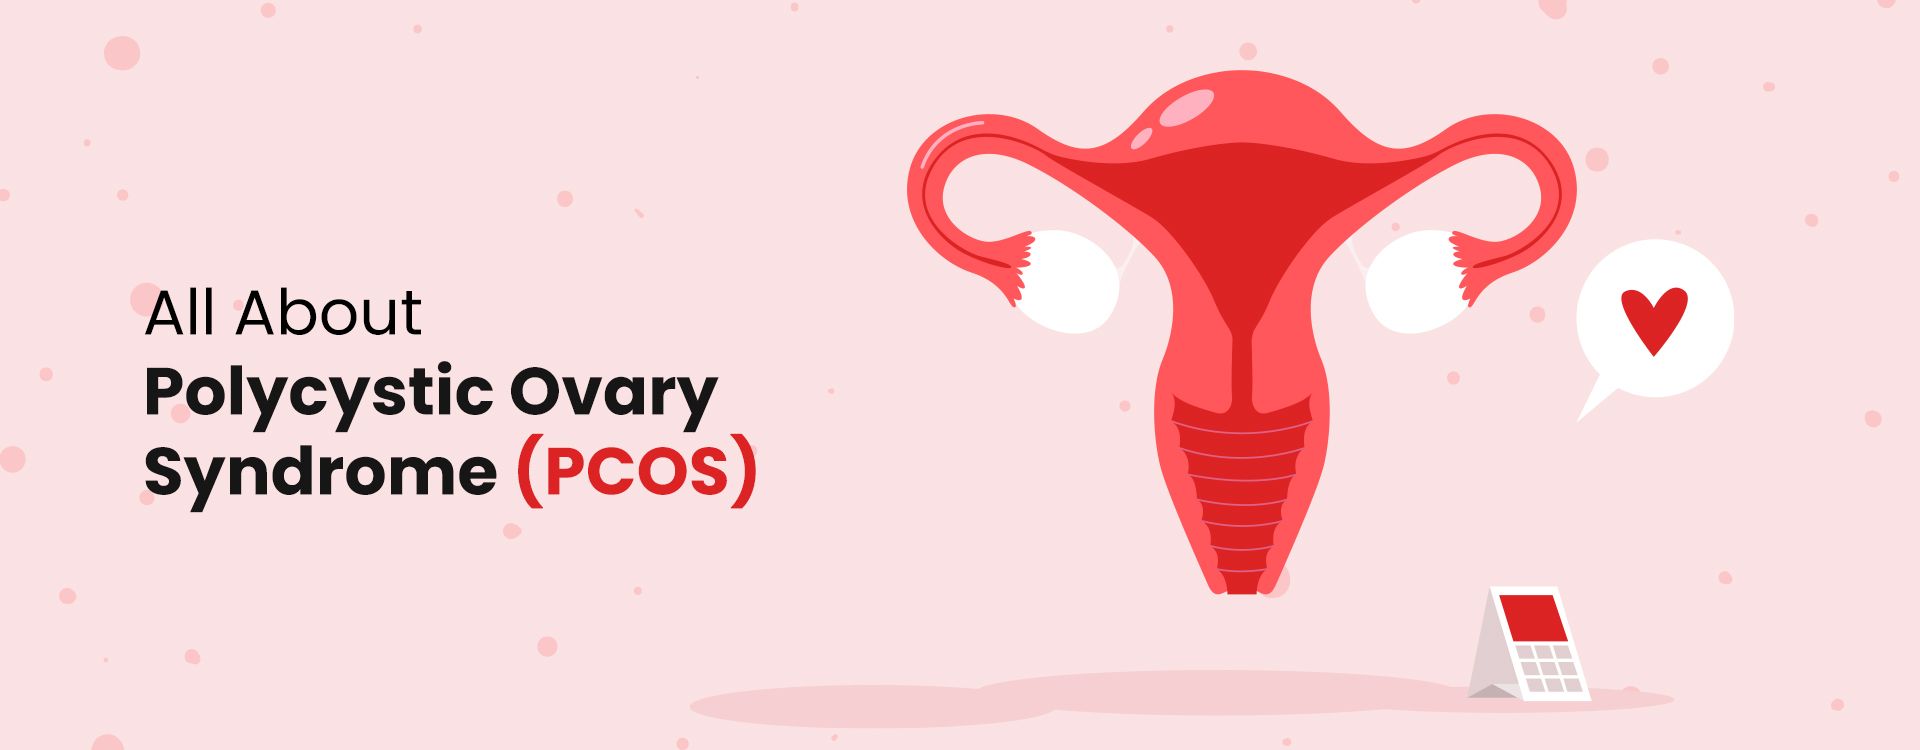 All About PCOS